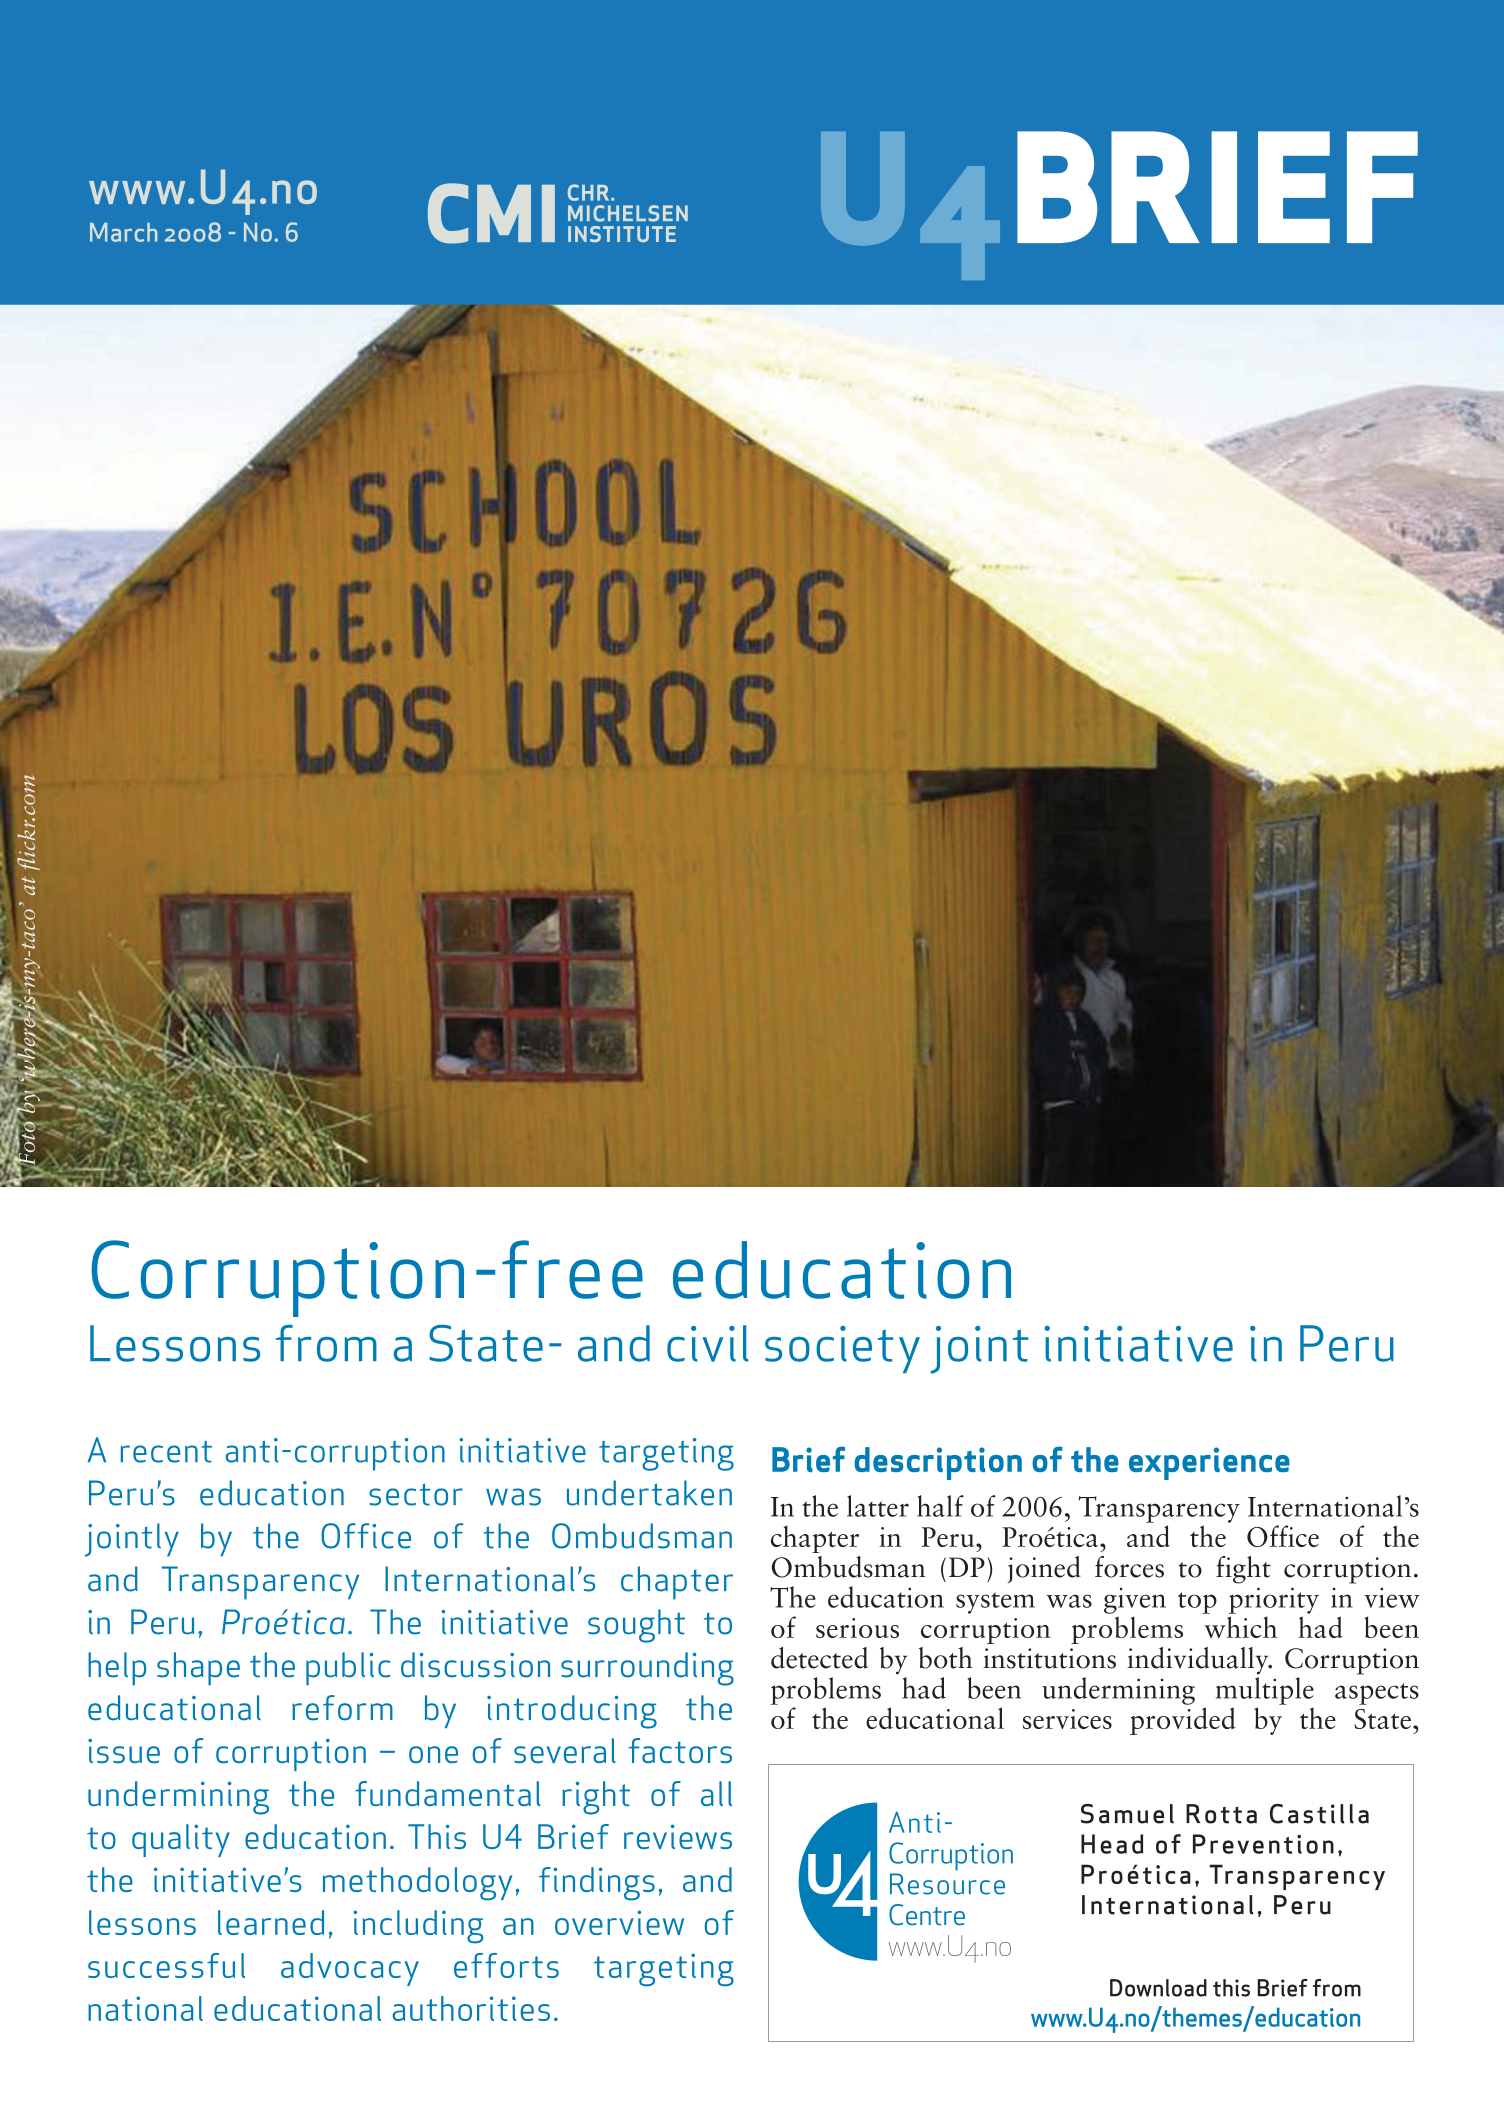 Corruption free education: Lessons from a state and civil society joint initiative in Peru